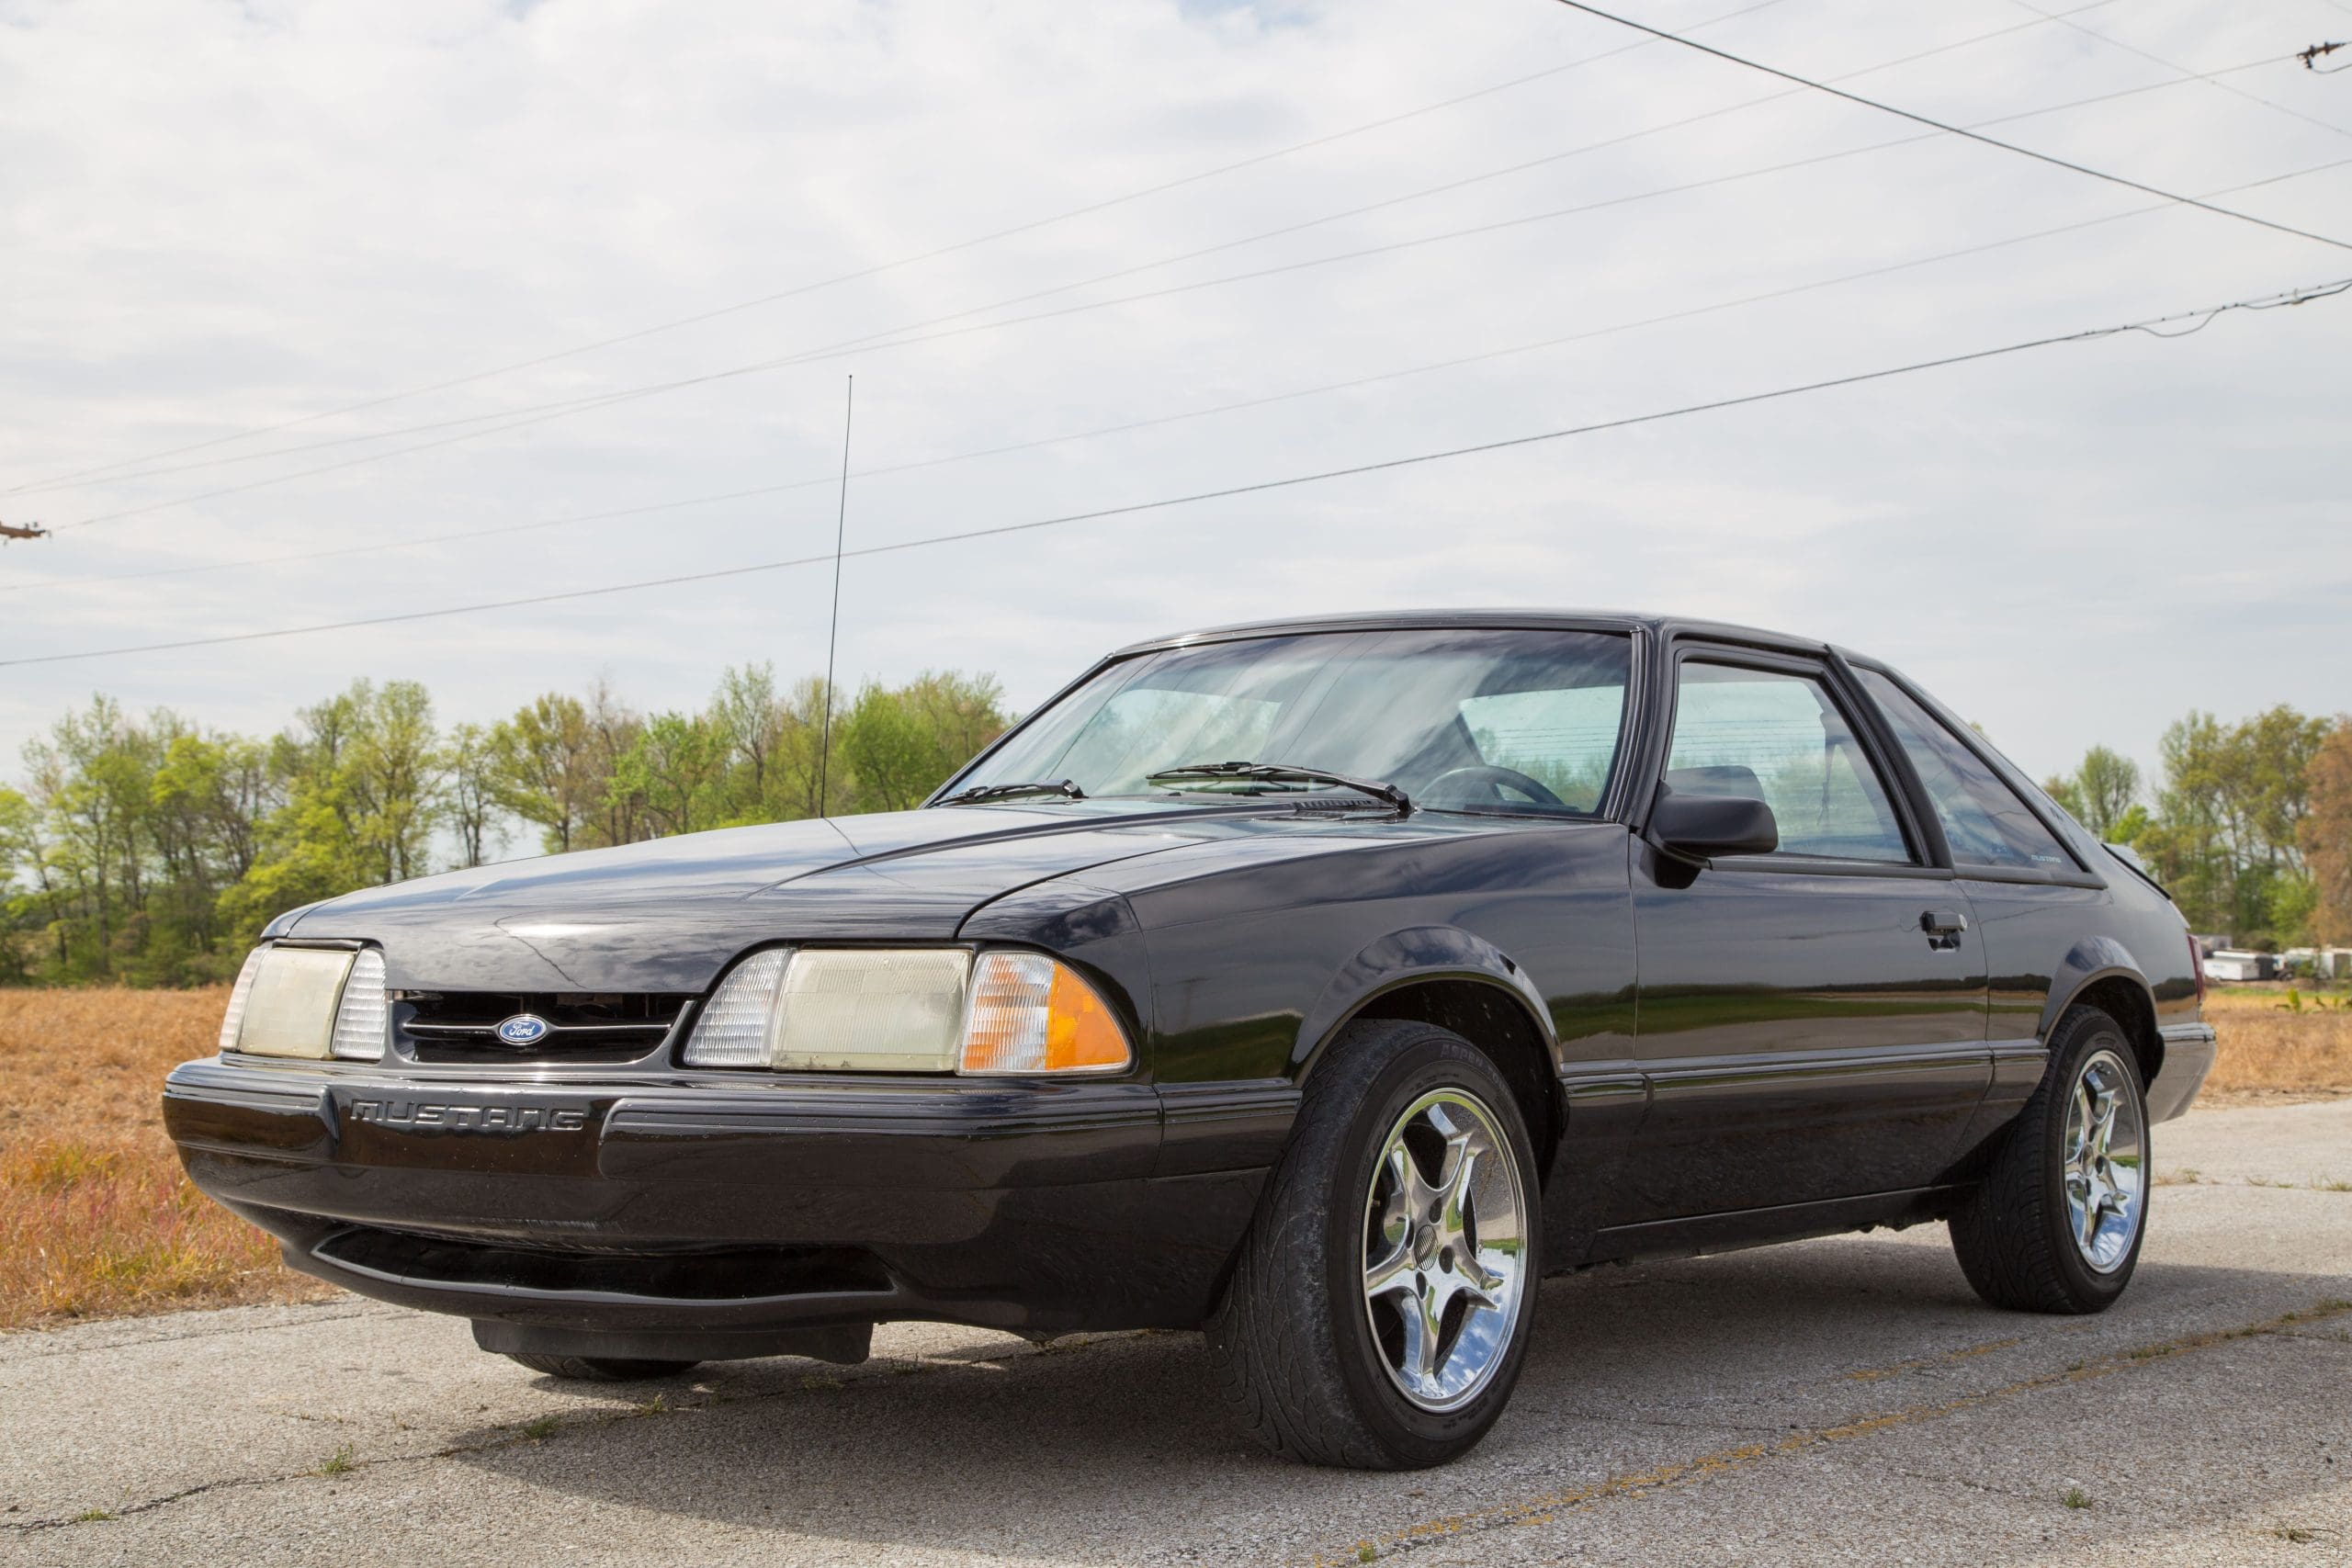 Black 1990 Ford Mustang